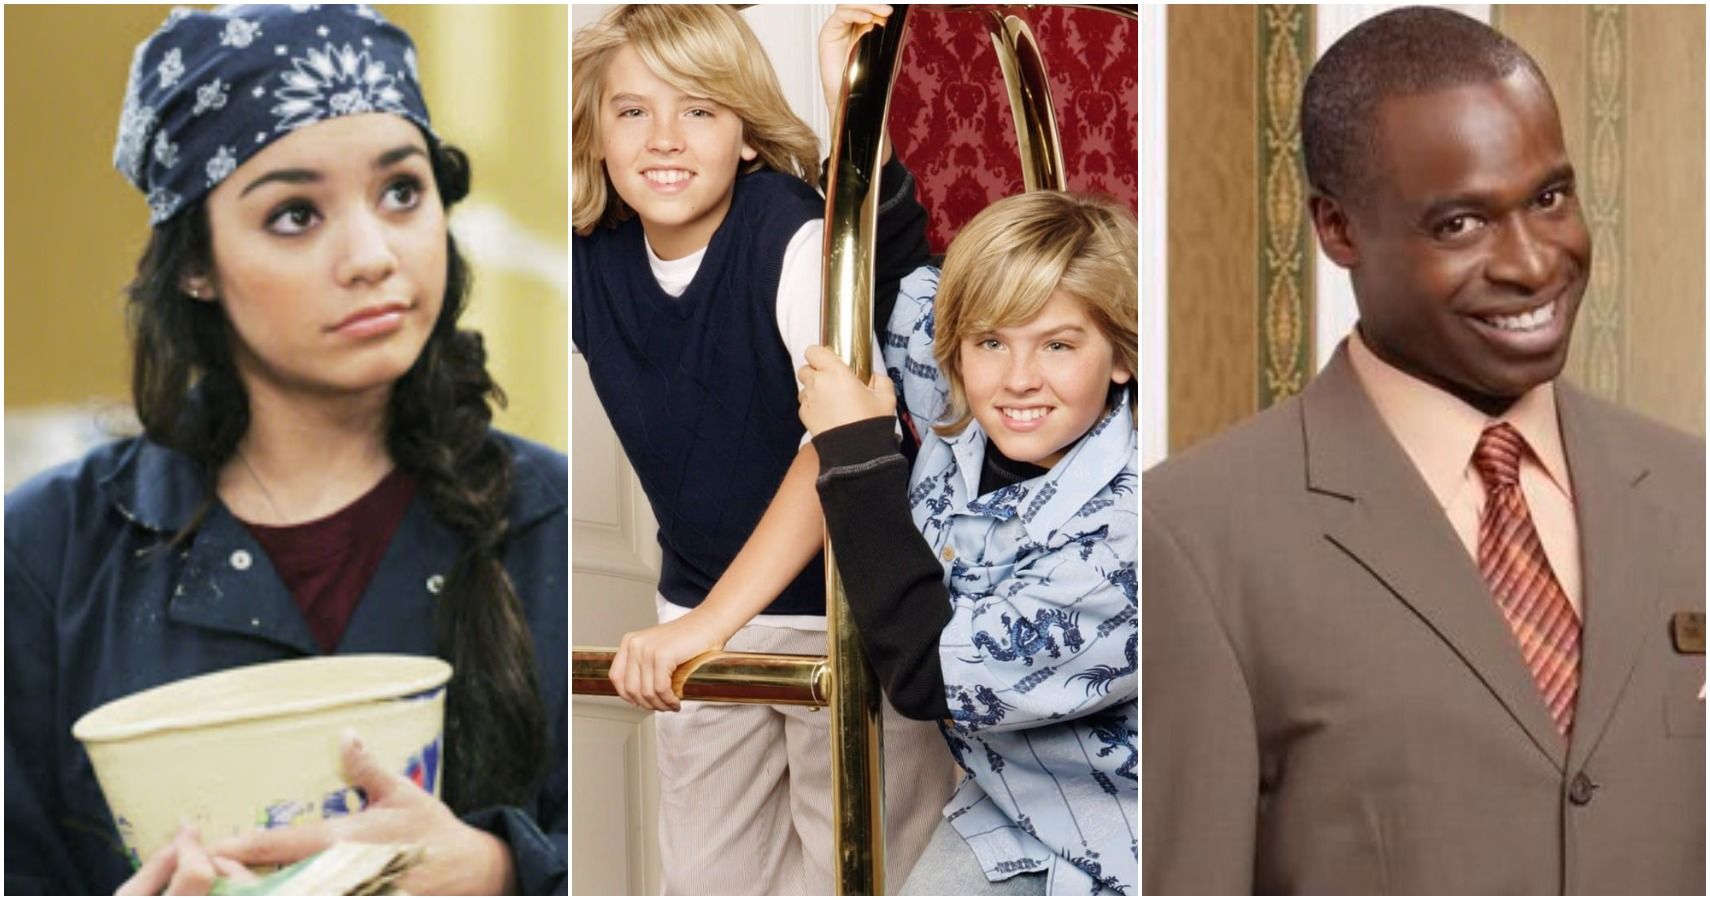 10 Things That Never Made Sense About The Suite Life Of Zack & Cody